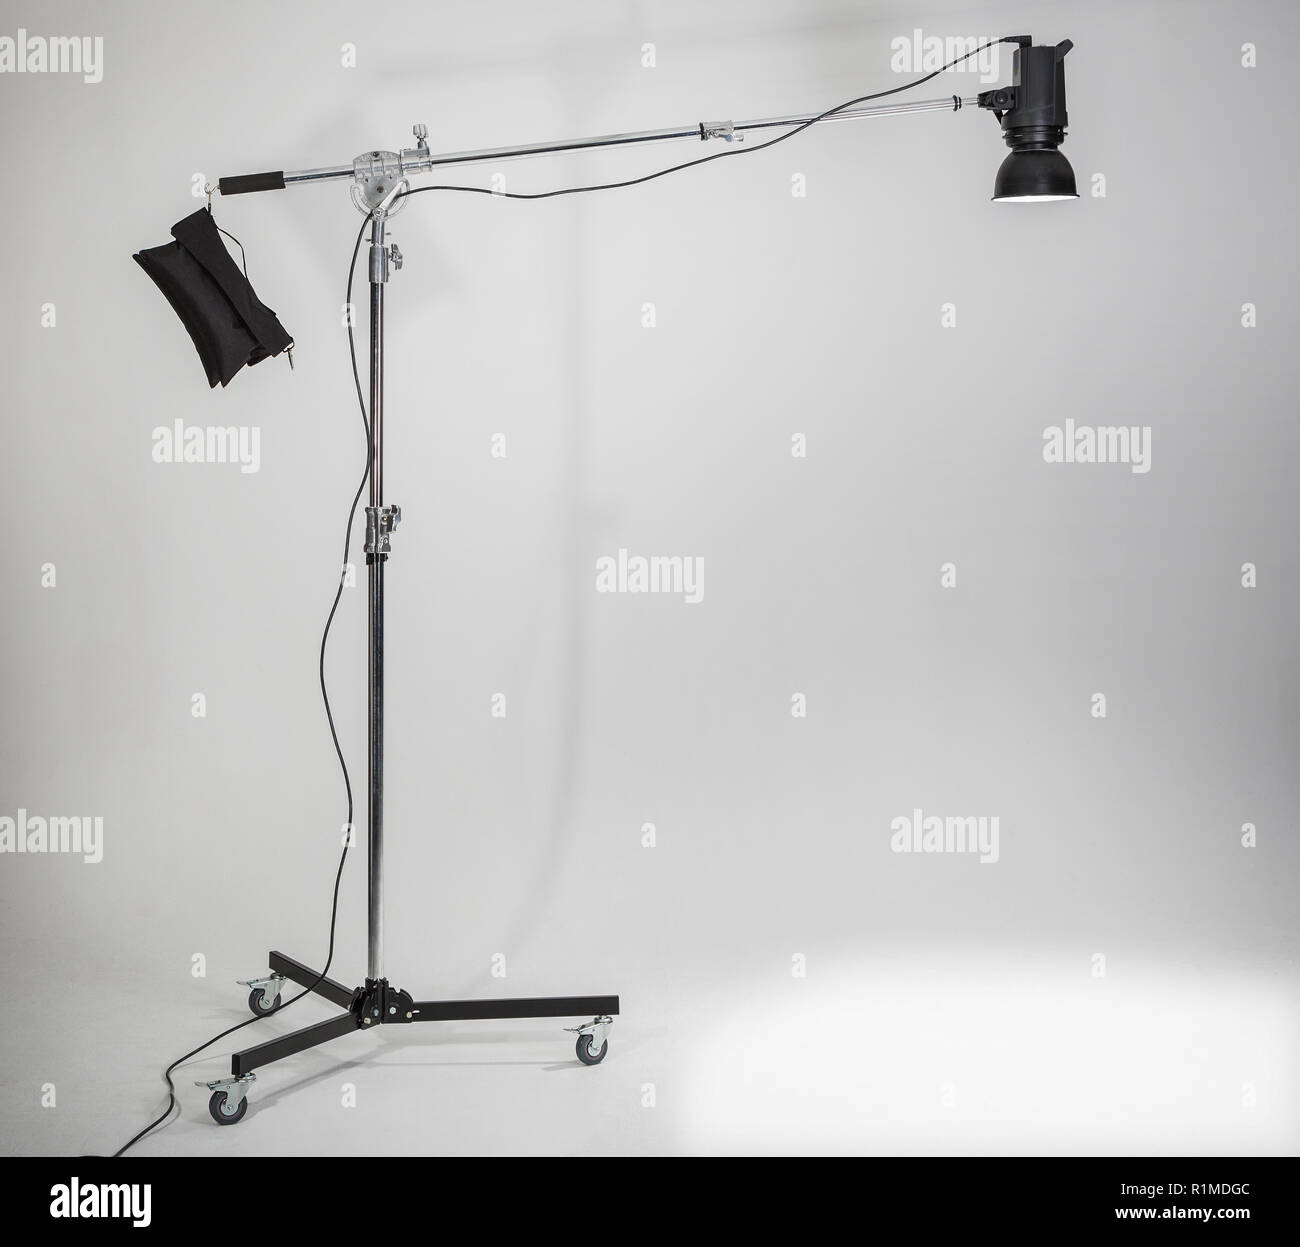 Studio light on a boom arm and stand in the studio. Stock Photo